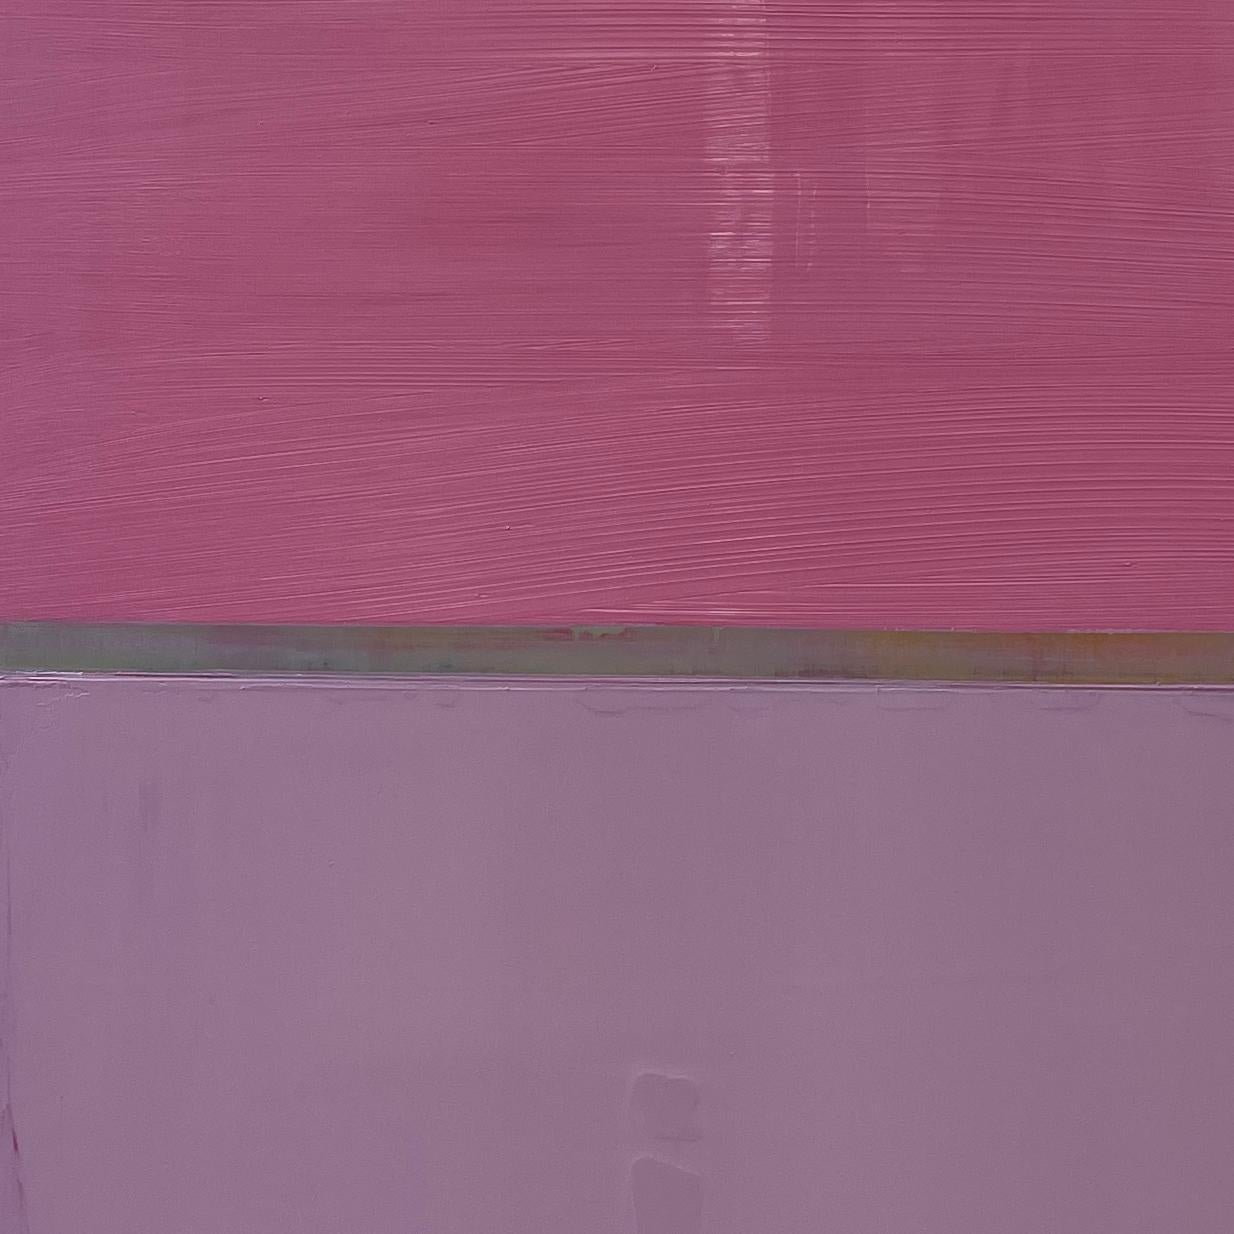 #1594 (Abstract painting) - Pink Abstract Painting by Arvid Boecker